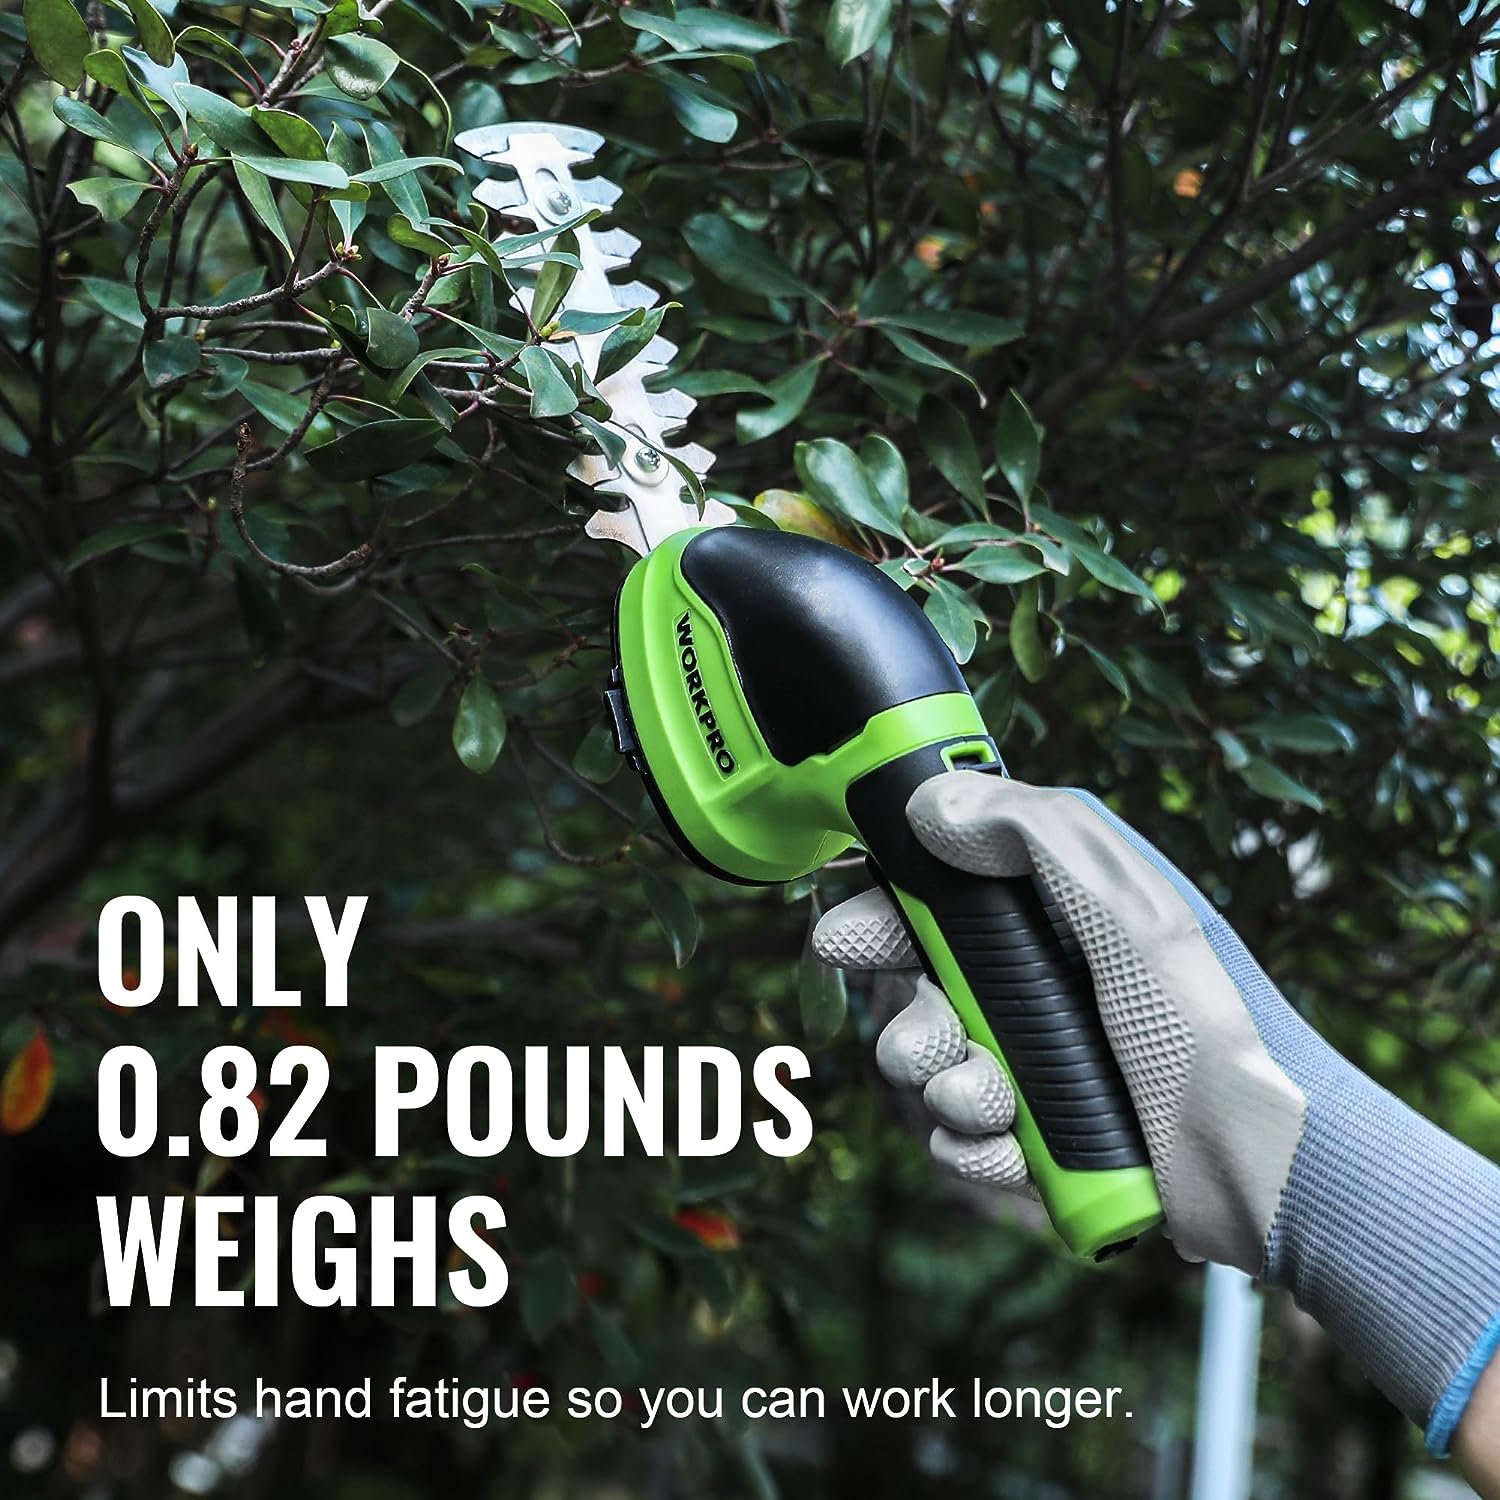 WORKPRO Cordless Grass Shear & Shrubbery Trimmer Review